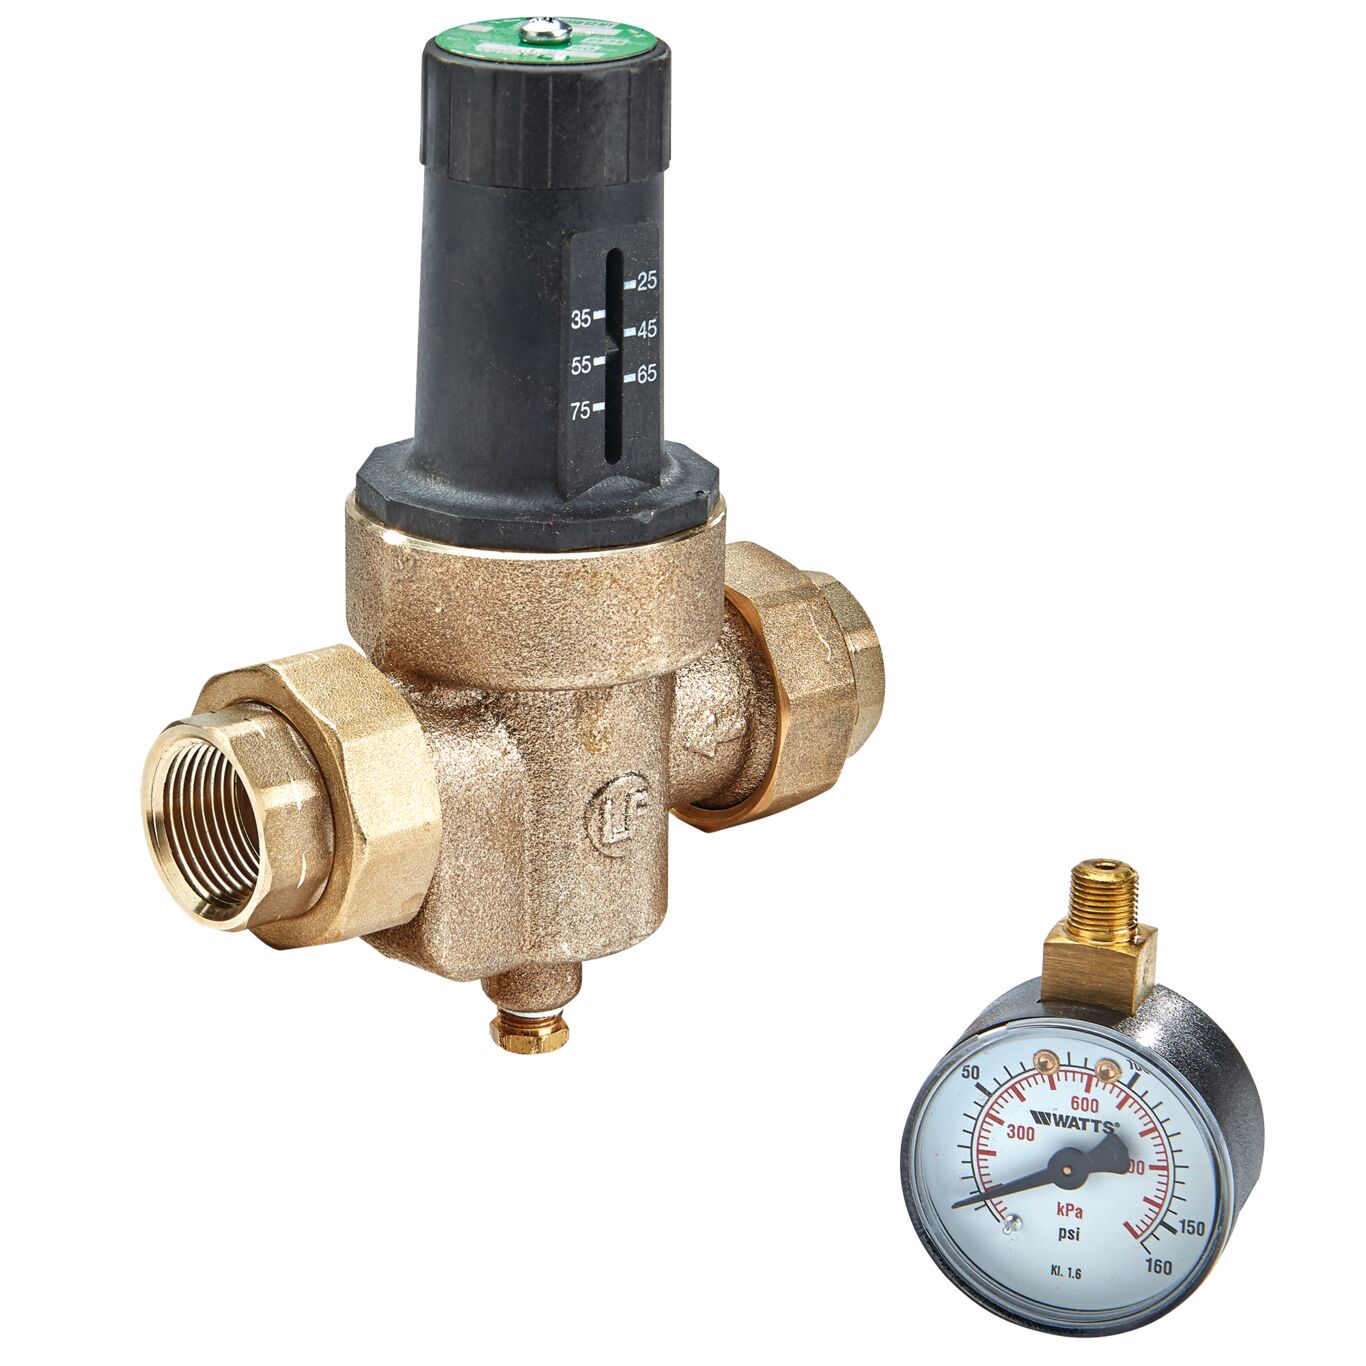 Product Image Lead Free Pressure Reducing Valve Double union